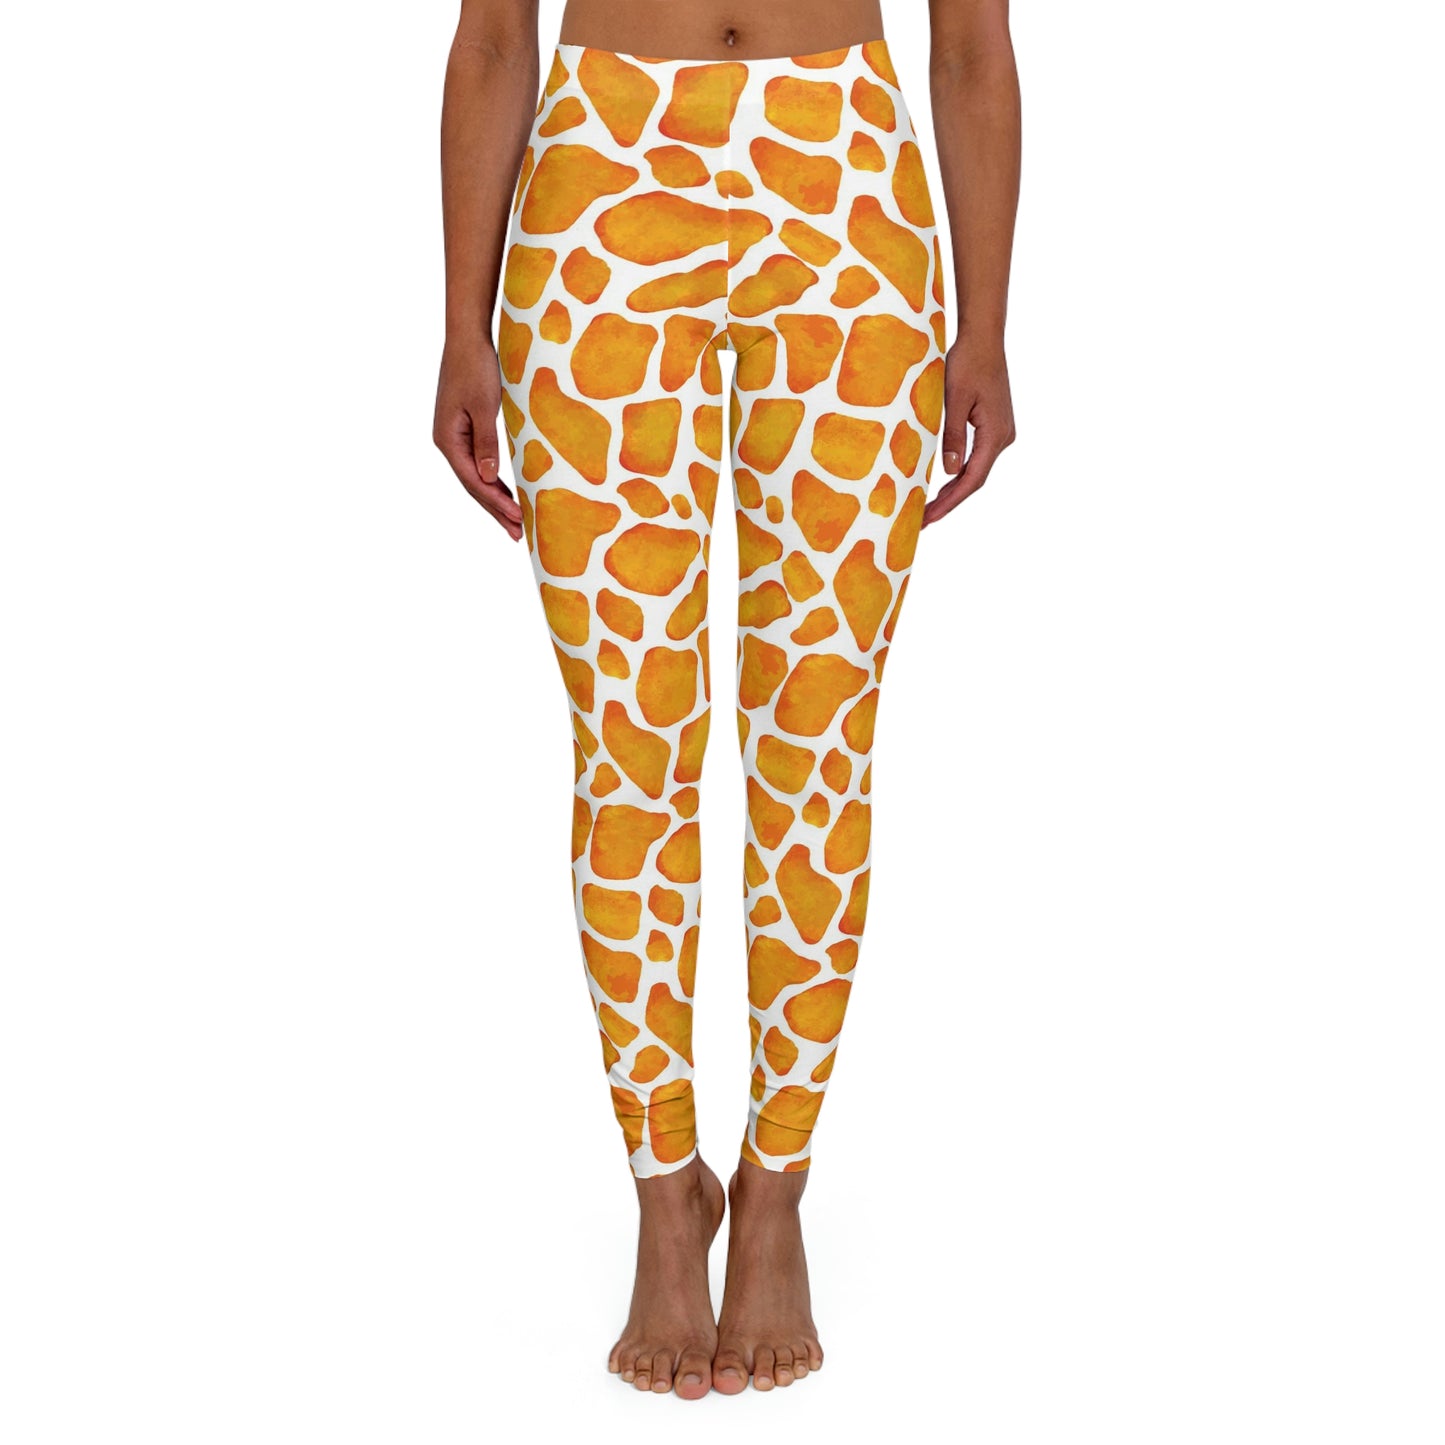 Giraffe Women Leggings animal kingdom, One of a Kind Workout Activewear for Wife Fitness, Best Friend, mom and me tights Christmas Gift